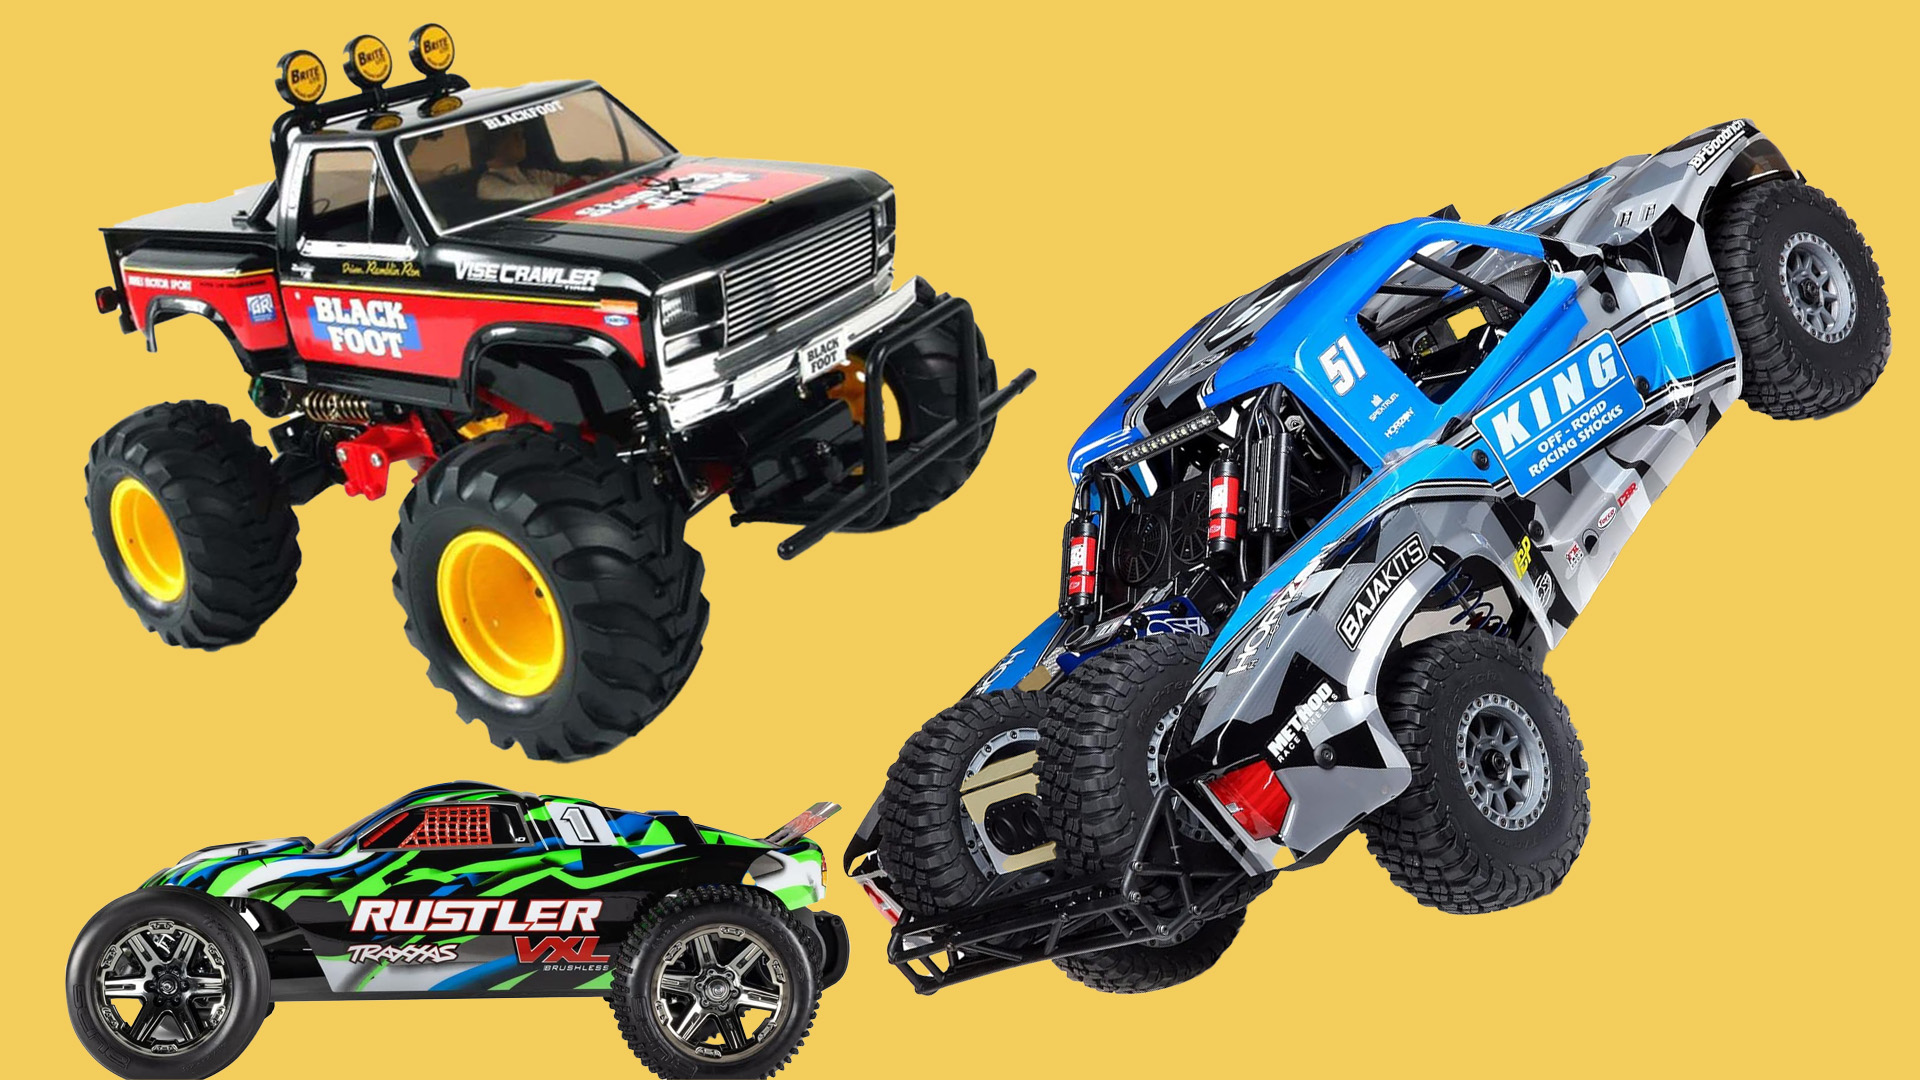 Traxxas Slash 2wd Monster Energy Edition Roller 1/10 Chassis Rc